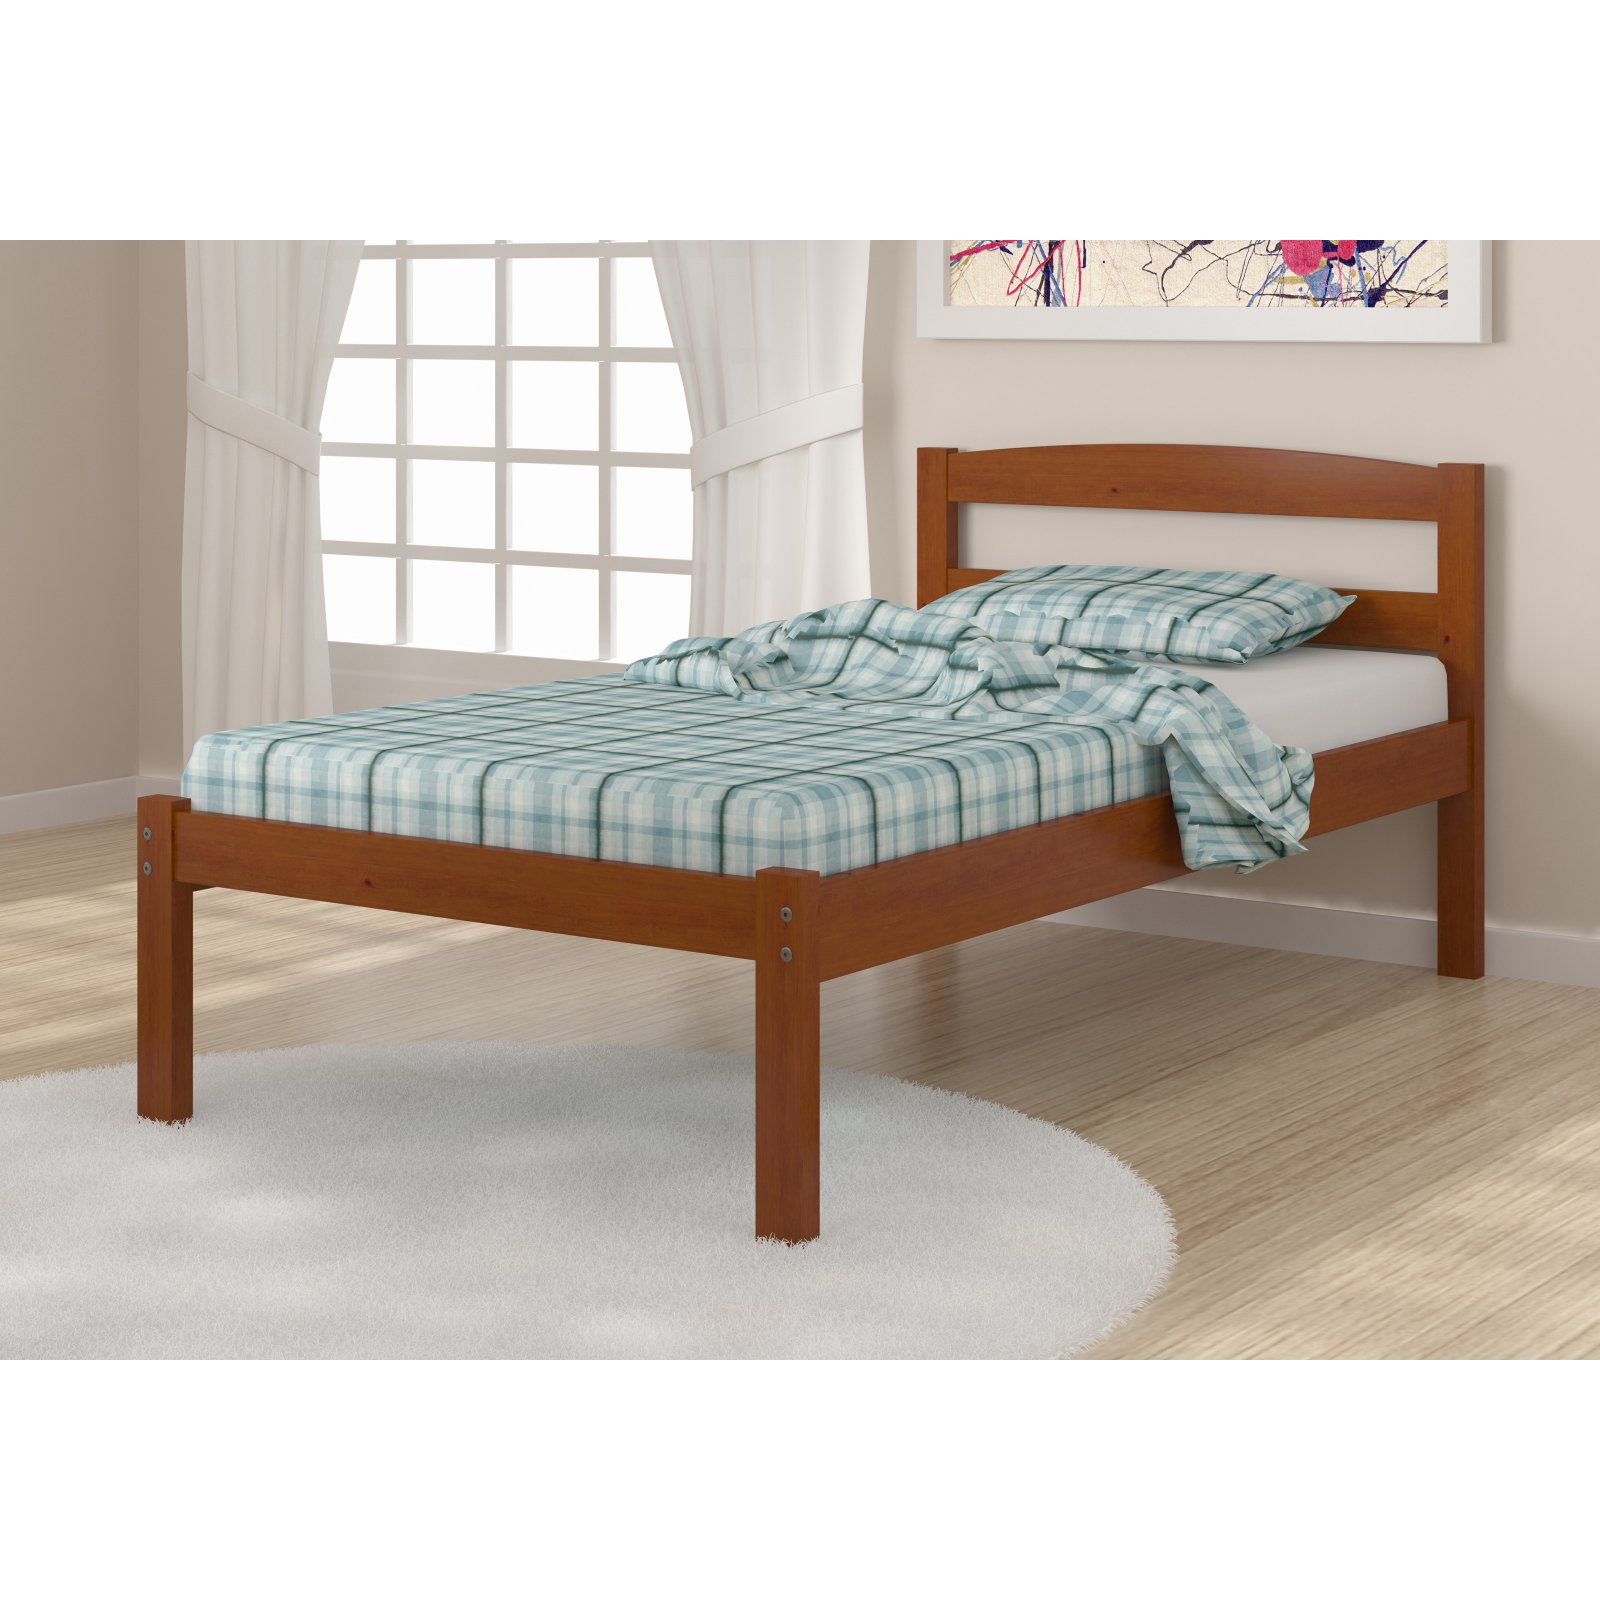 Donco Kids Econo Panel Bed - image 5 of 11